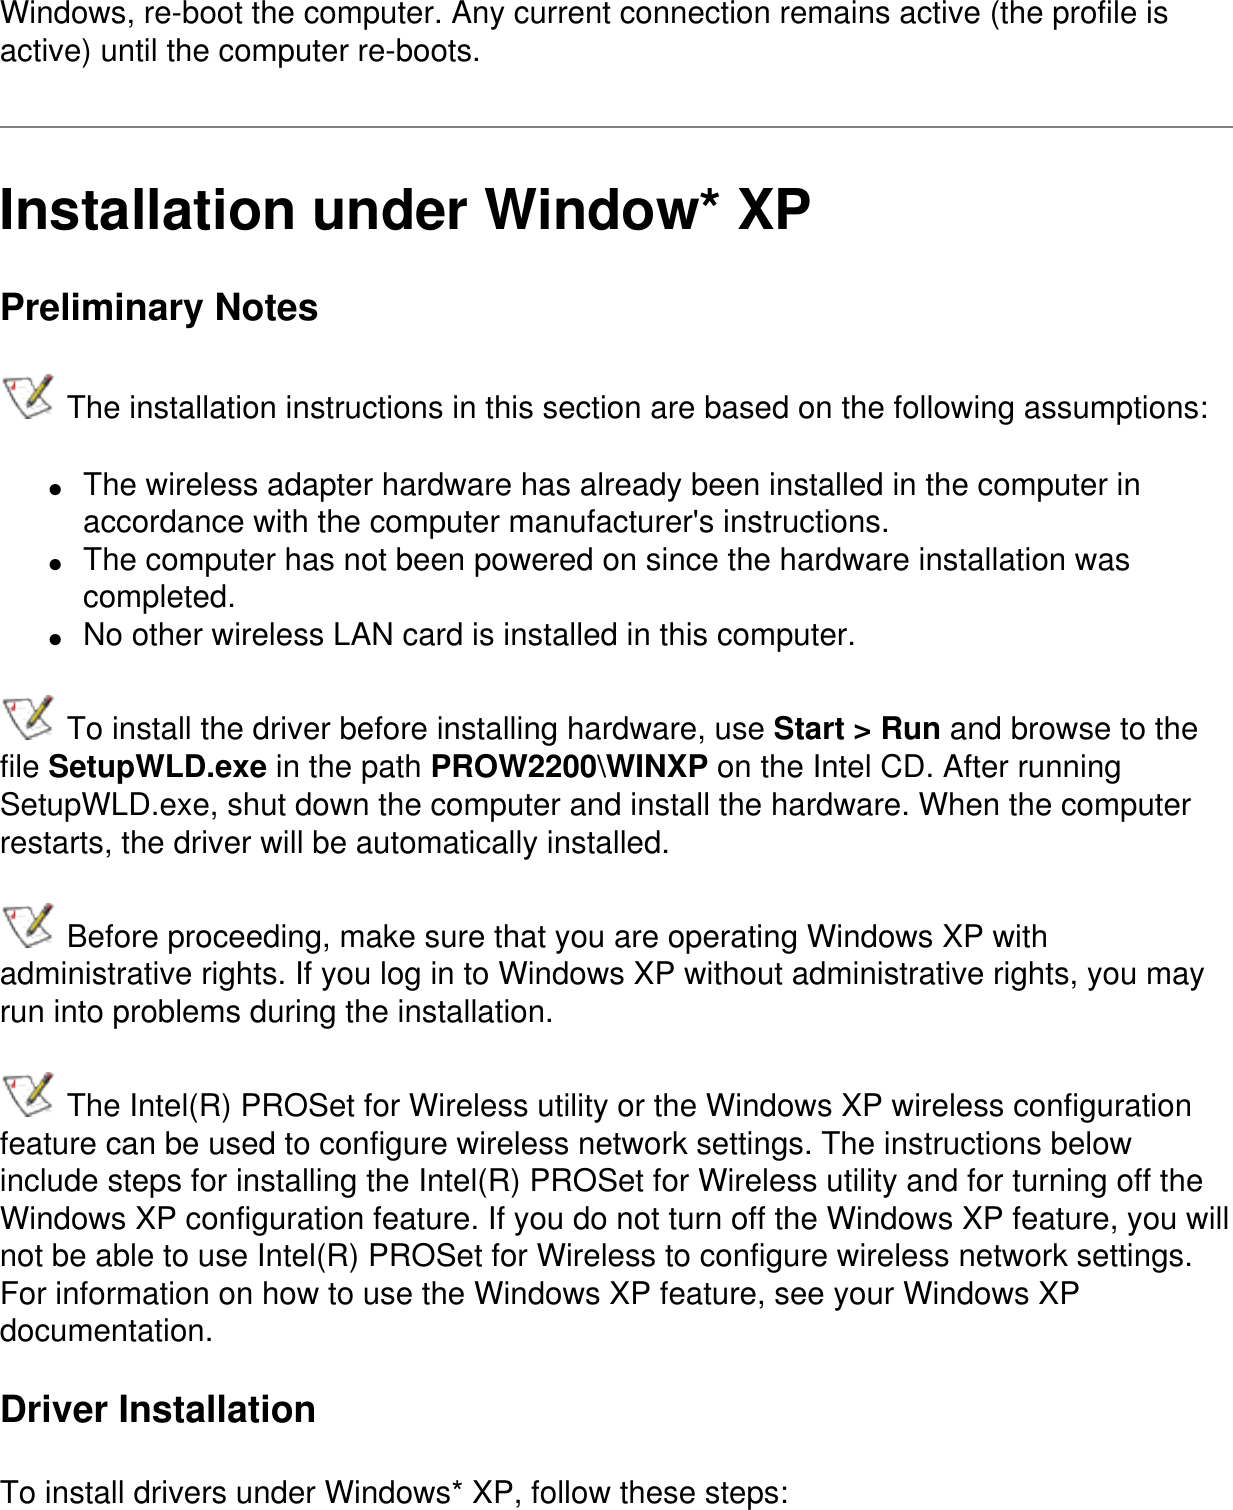 Windows, re-boot the computer. Any current connection remains active (the profile is active) until the computer re-boots.   Installation under Window* XPPreliminary Notes The installation instructions in this section are based on the following assumptions:●     The wireless adapter hardware has already been installed in the computer in accordance with the computer manufacturer&apos;s instructions.●     The computer has not been powered on since the hardware installation was completed.●     No other wireless LAN card is installed in this computer. To install the driver before installing hardware, use Start &gt; Run and browse to the file SetupWLD.exe in the path PROW2200\WINXP on the Intel CD. After running SetupWLD.exe, shut down the computer and install the hardware. When the computer restarts, the driver will be automatically installed. Before proceeding, make sure that you are operating Windows XP with administrative rights. If you log in to Windows XP without administrative rights, you may run into problems during the installation.  The Intel(R) PROSet for Wireless utility or the Windows XP wireless configuration feature can be used to configure wireless network settings. The instructions below include steps for installing the Intel(R) PROSet for Wireless utility and for turning off the Windows XP configuration feature. If you do not turn off the Windows XP feature, you will not be able to use Intel(R) PROSet for Wireless to configure wireless network settings. For information on how to use the Windows XP feature, see your Windows XP documentation.Driver InstallationTo install drivers under Windows* XP, follow these steps: